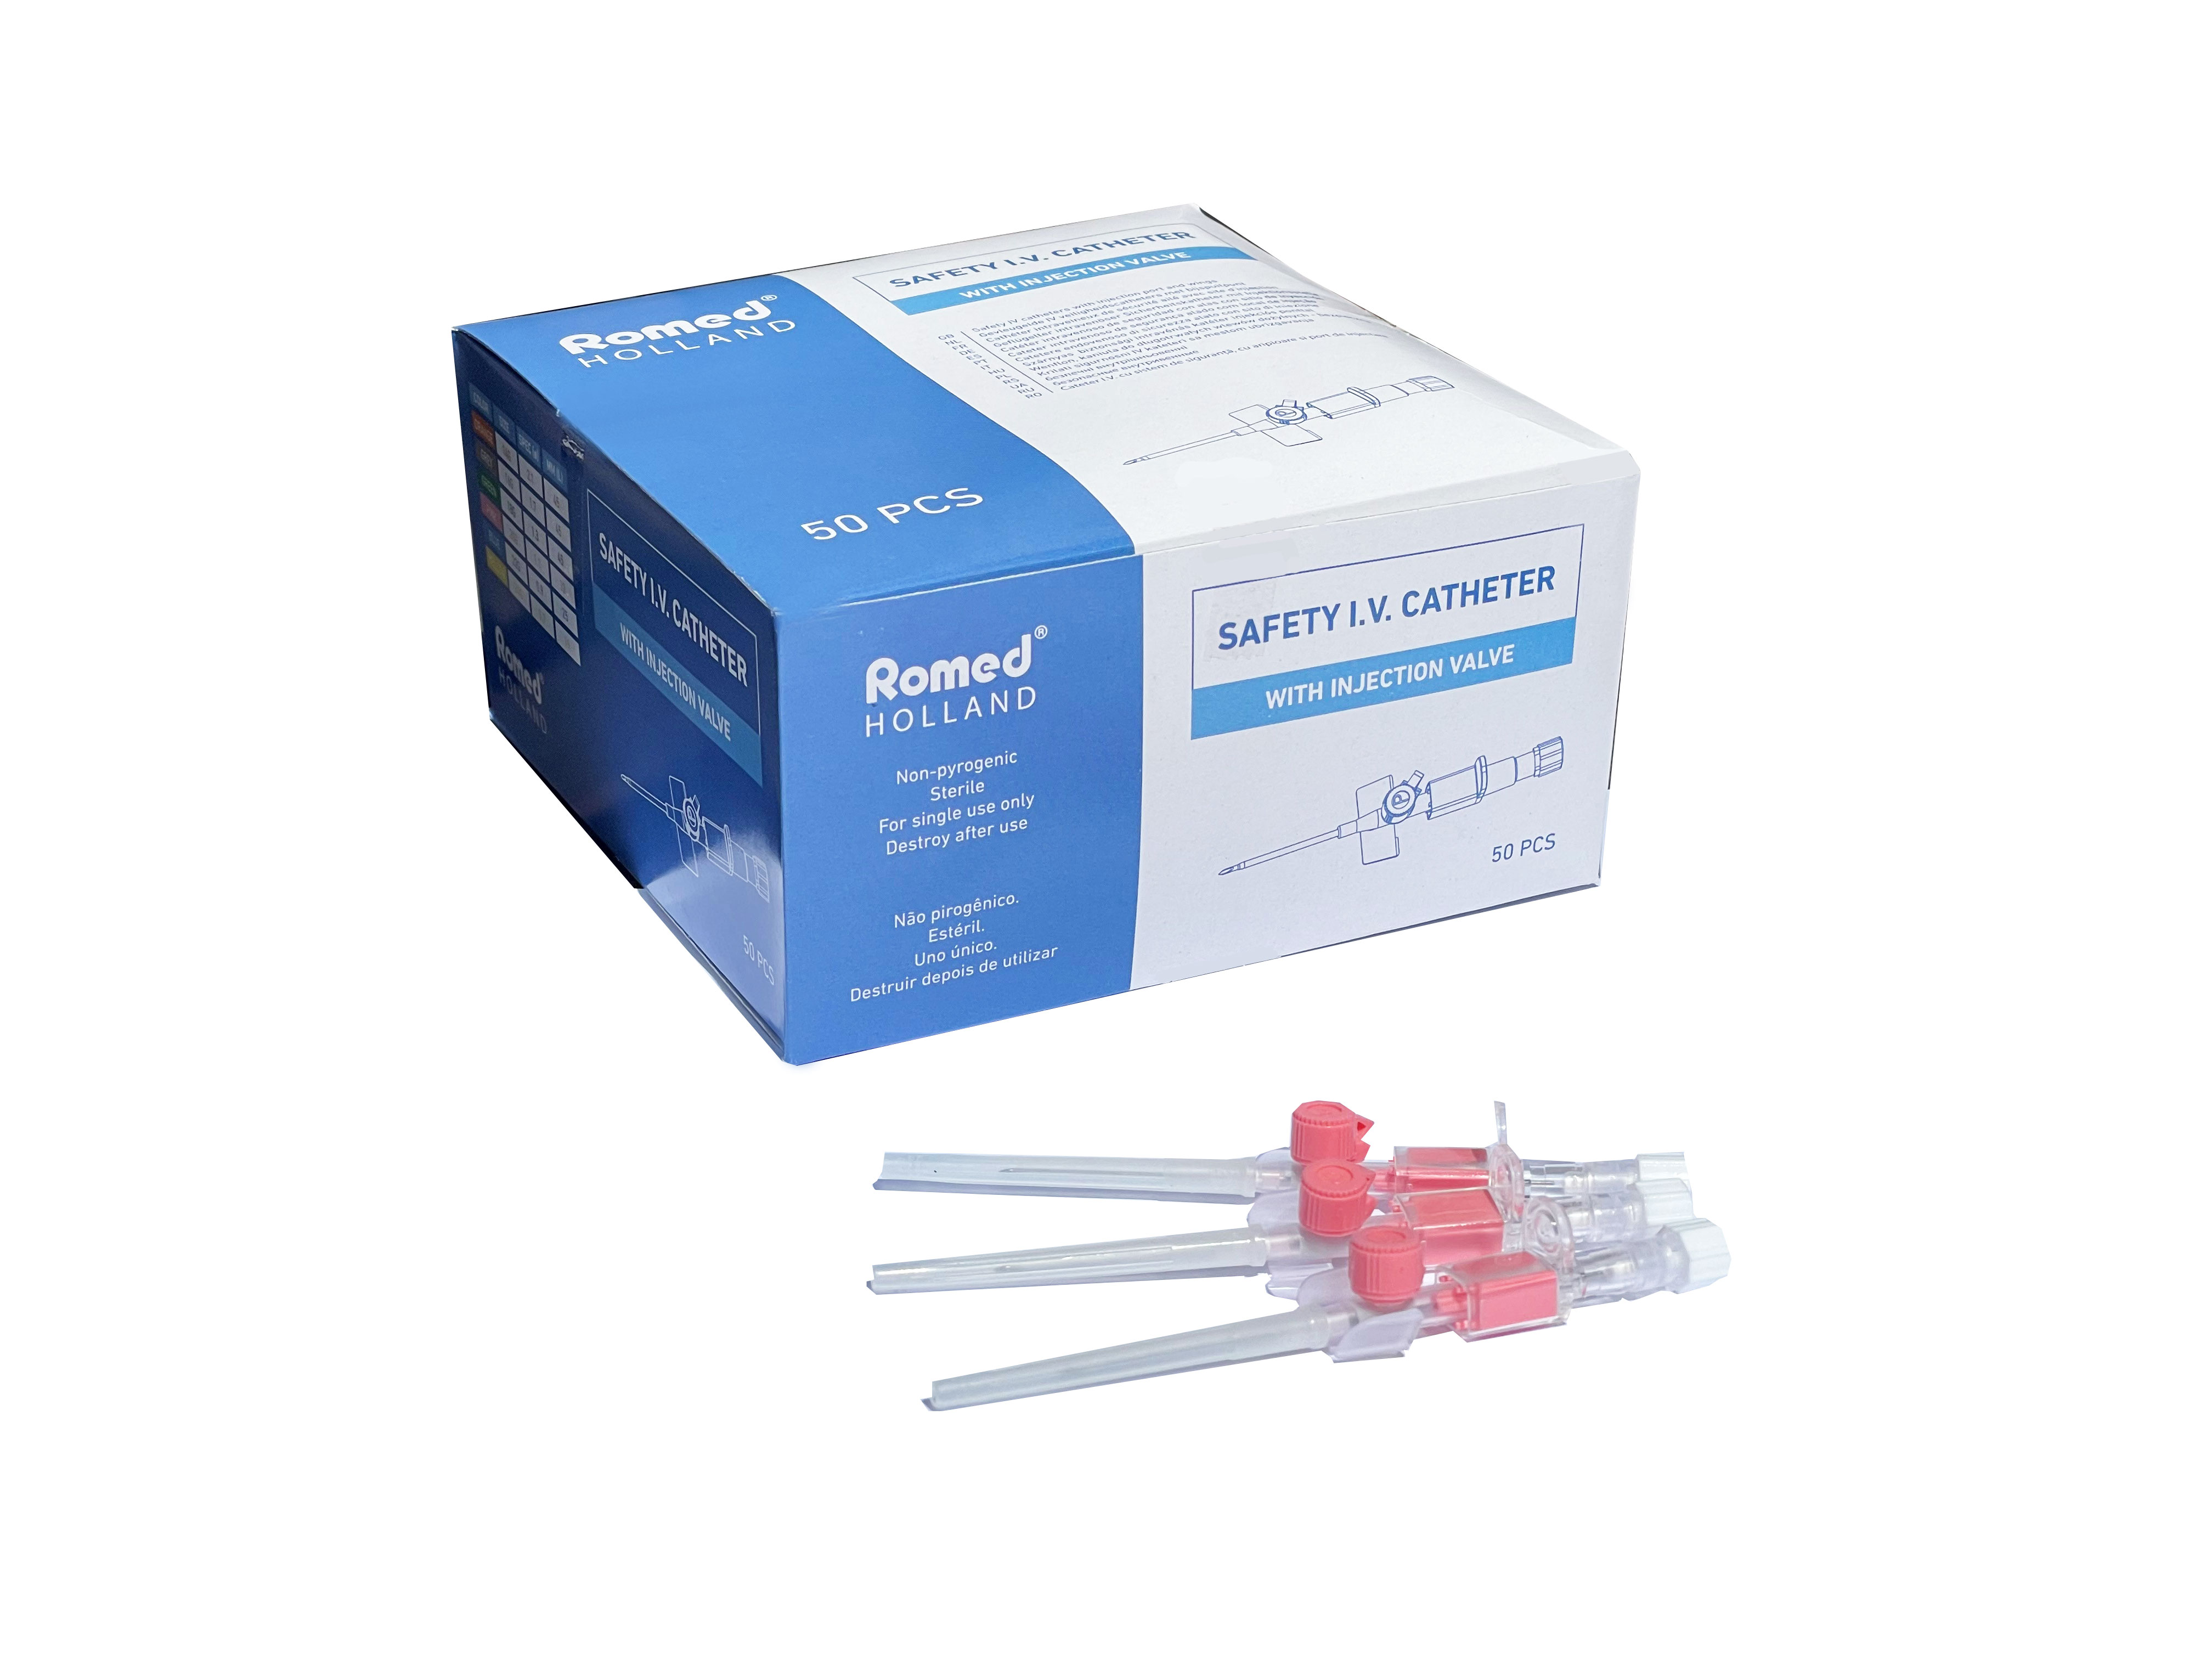 S-IVCATH-24G Romed Safety I.V. catheters with injection valve, 24G, sterile per piece, 50 pcs in an inner box, 10 x 50 pcs = 500 pcs in a carton.